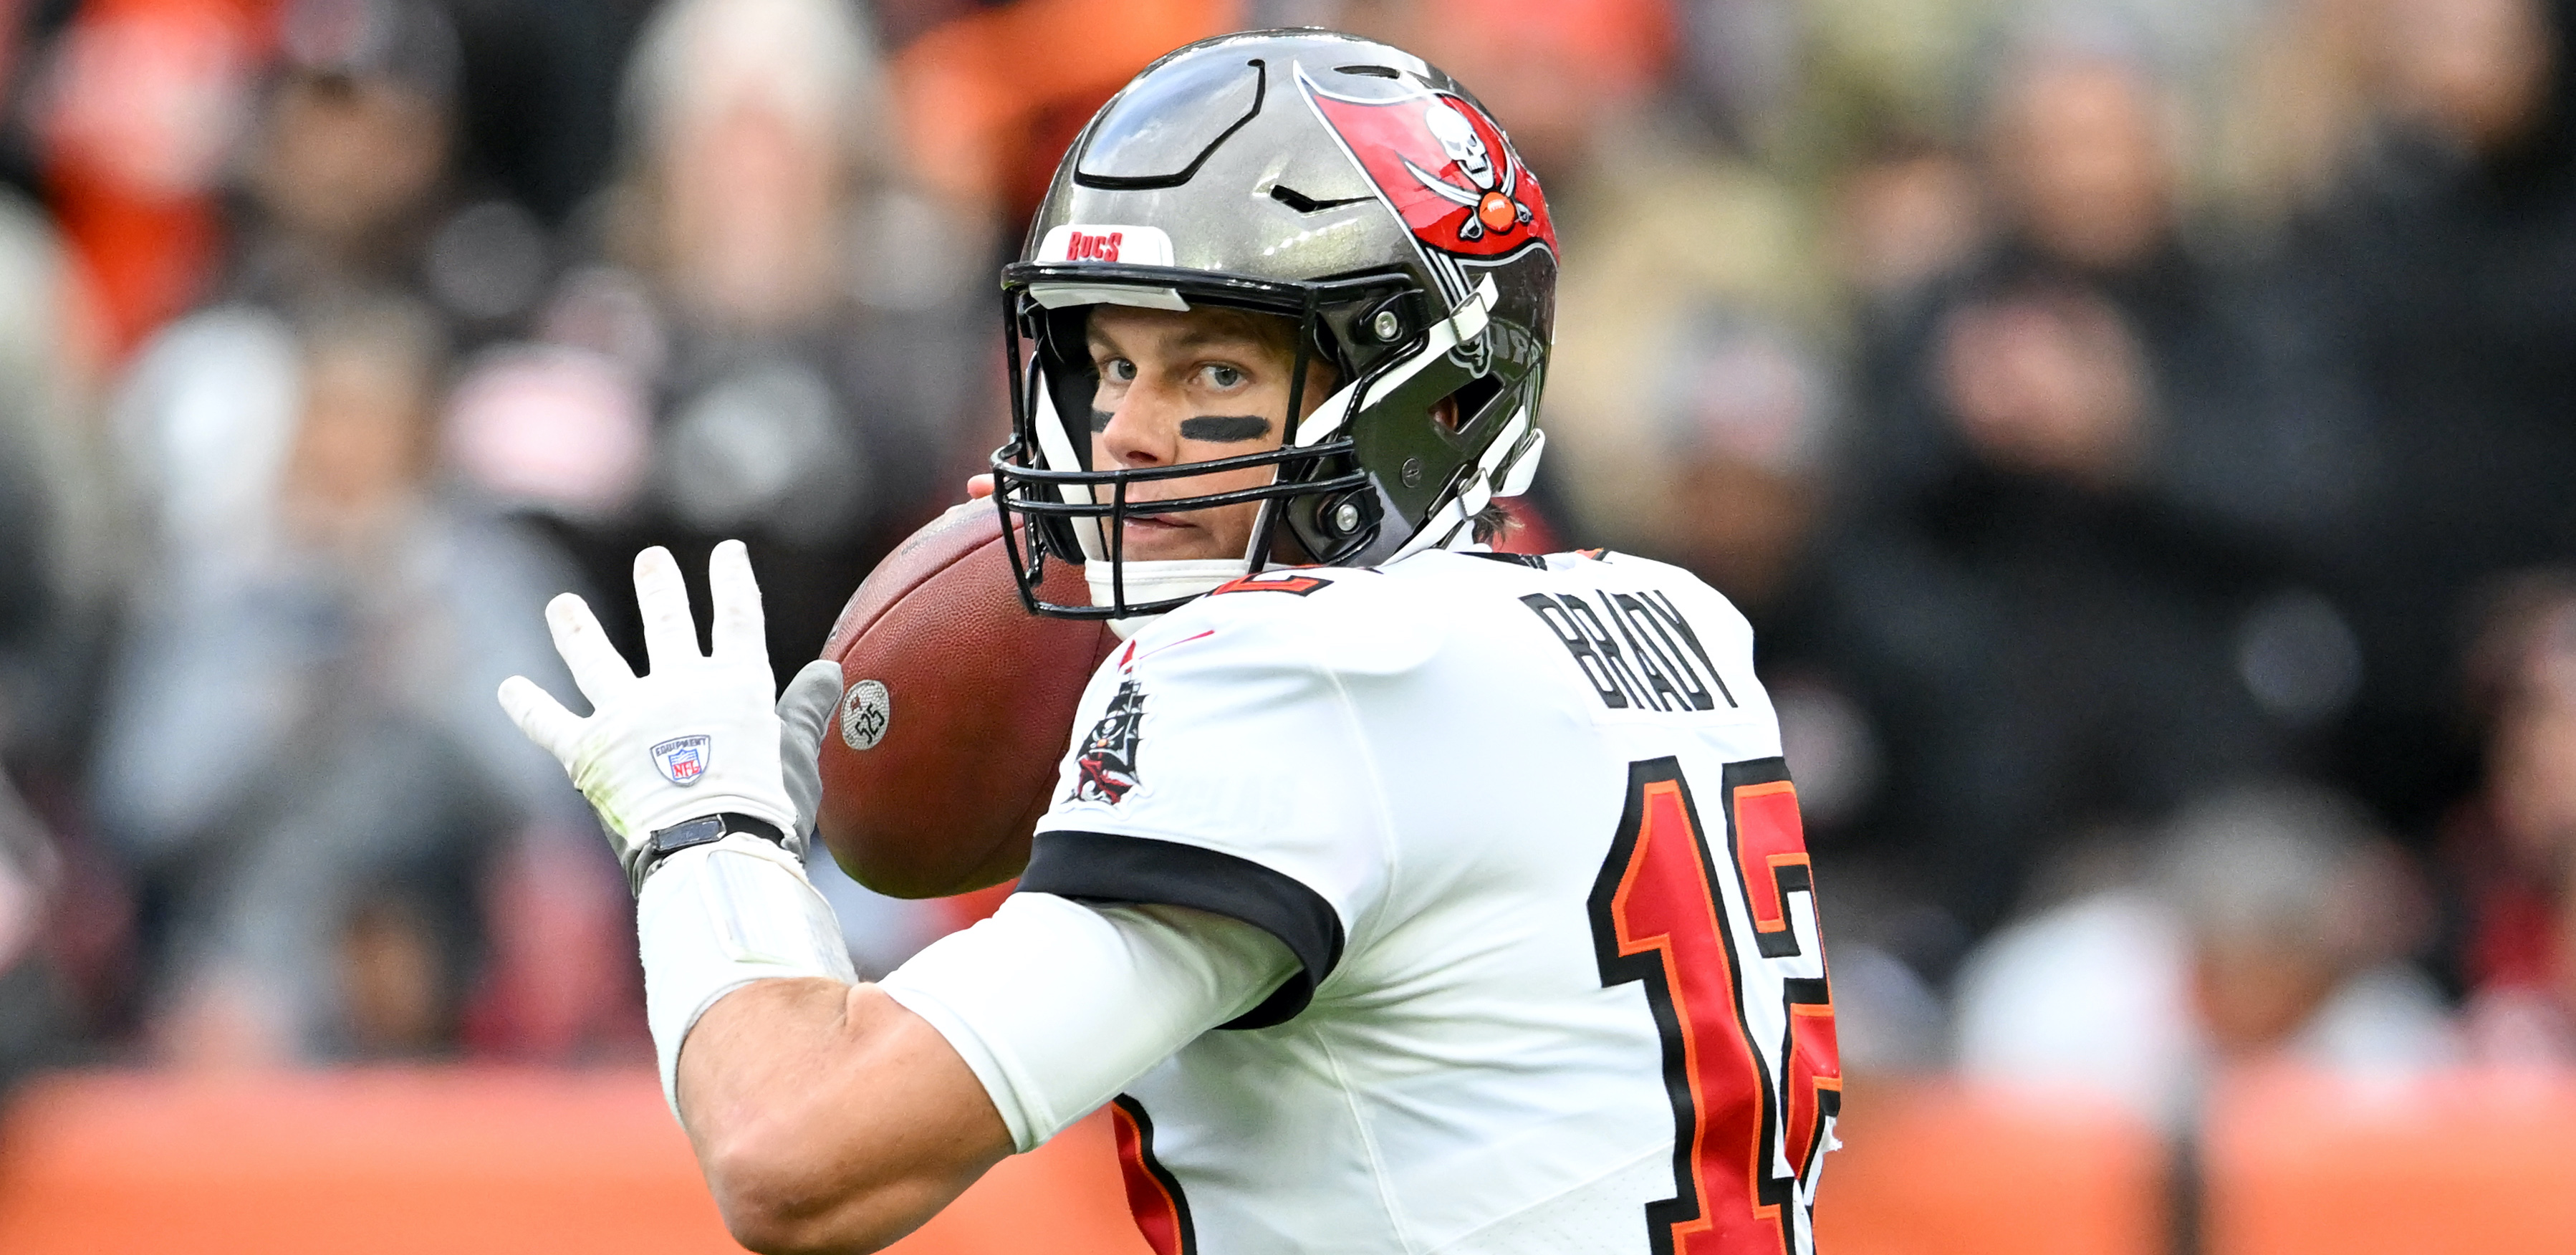 Saints at Buccaneers: MNF Best Bets For Week 13